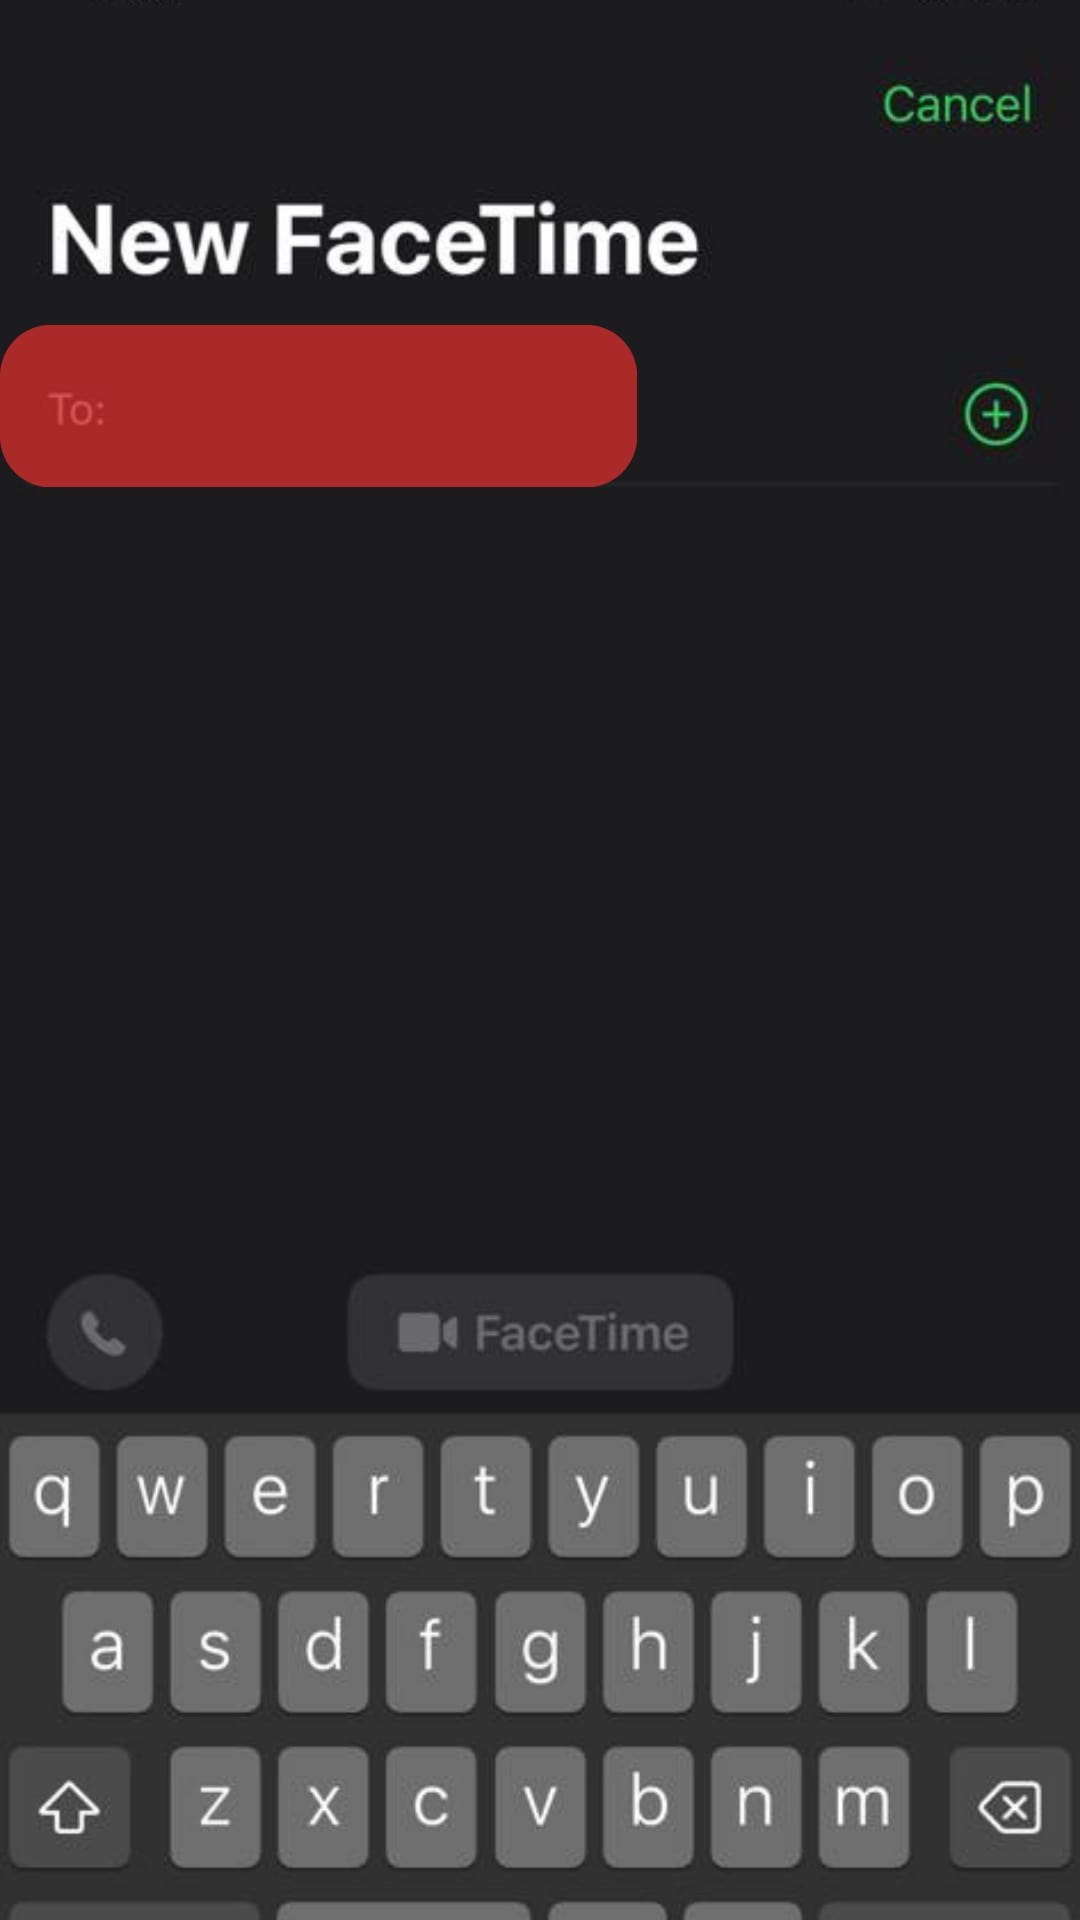 Type The Details Of The Person To Facetime.